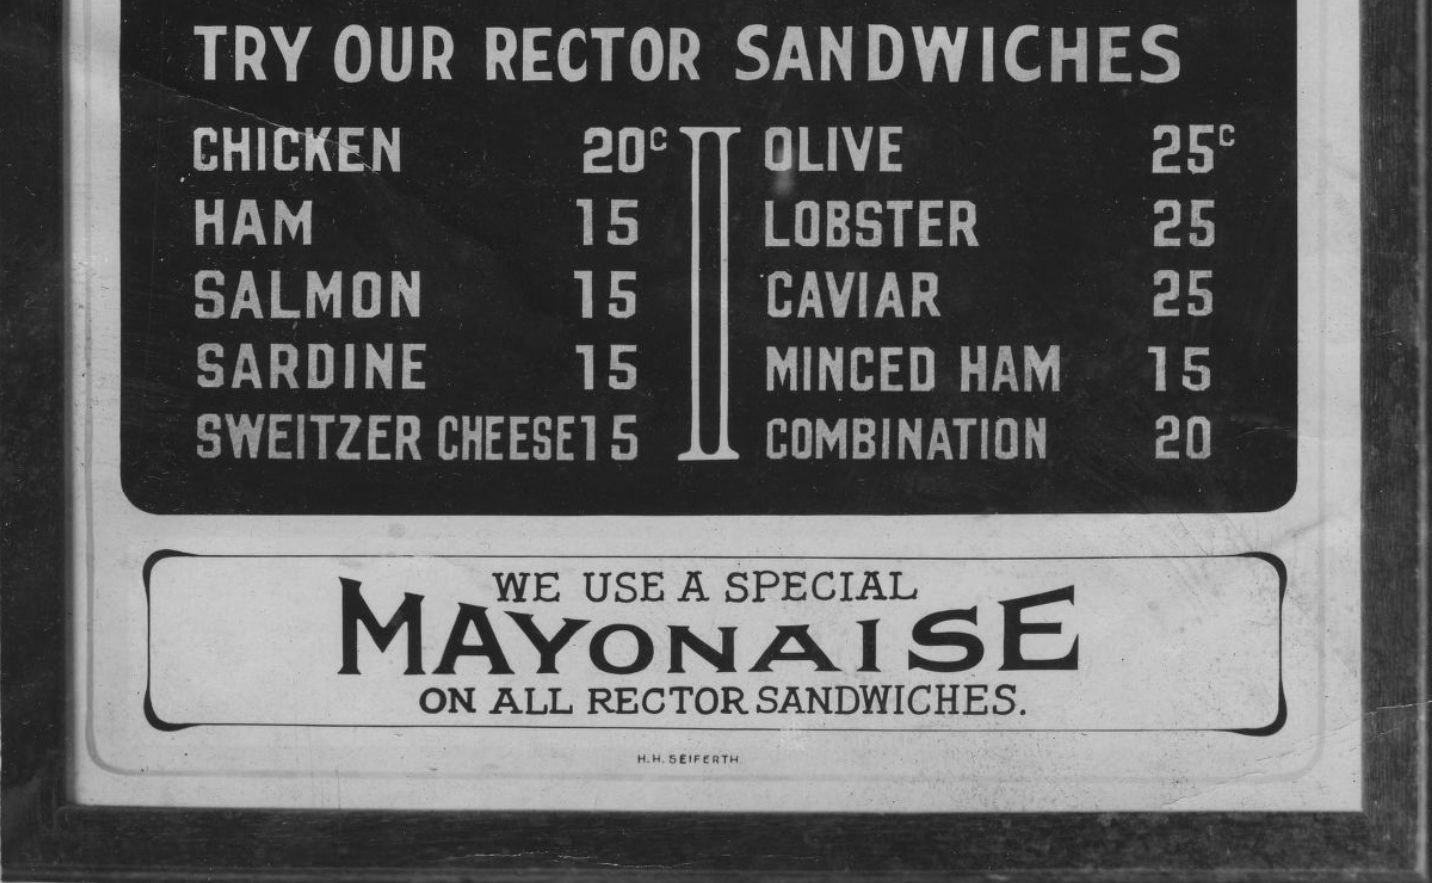 Portion of a menu board encouraging customers to "try our rector sandwiches".